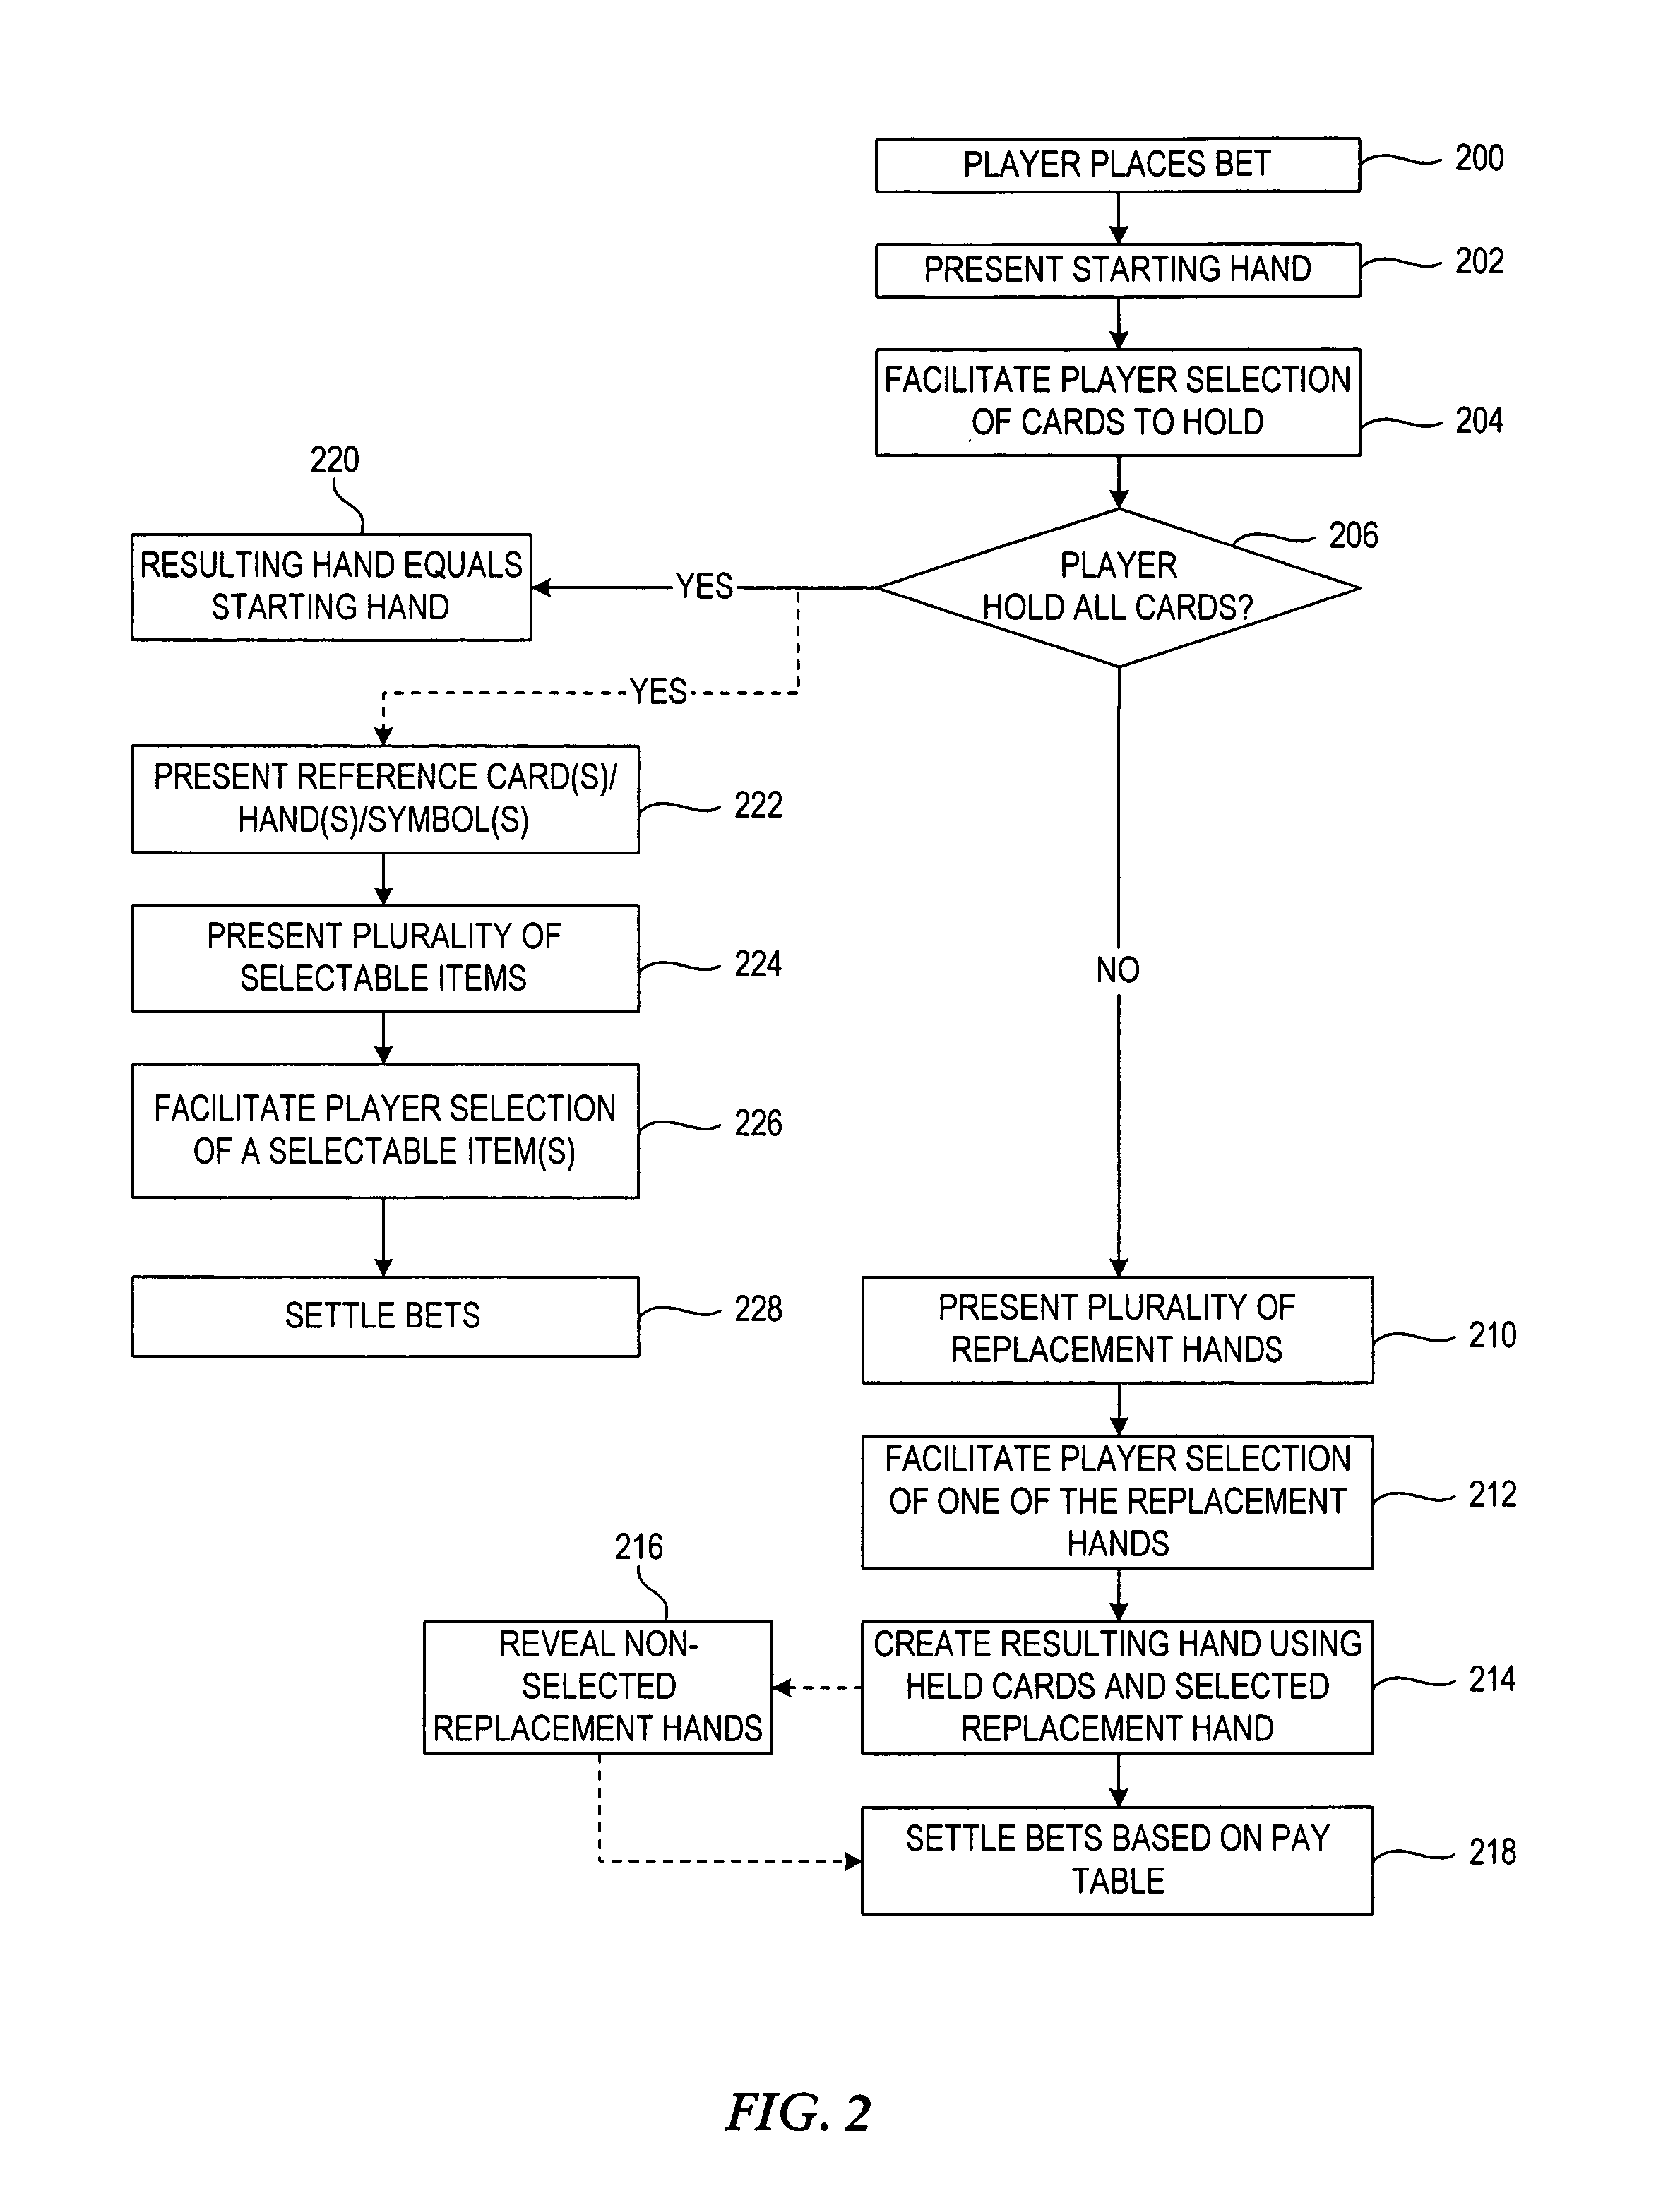 Apparatus and method for playing poker-style games involving a draw